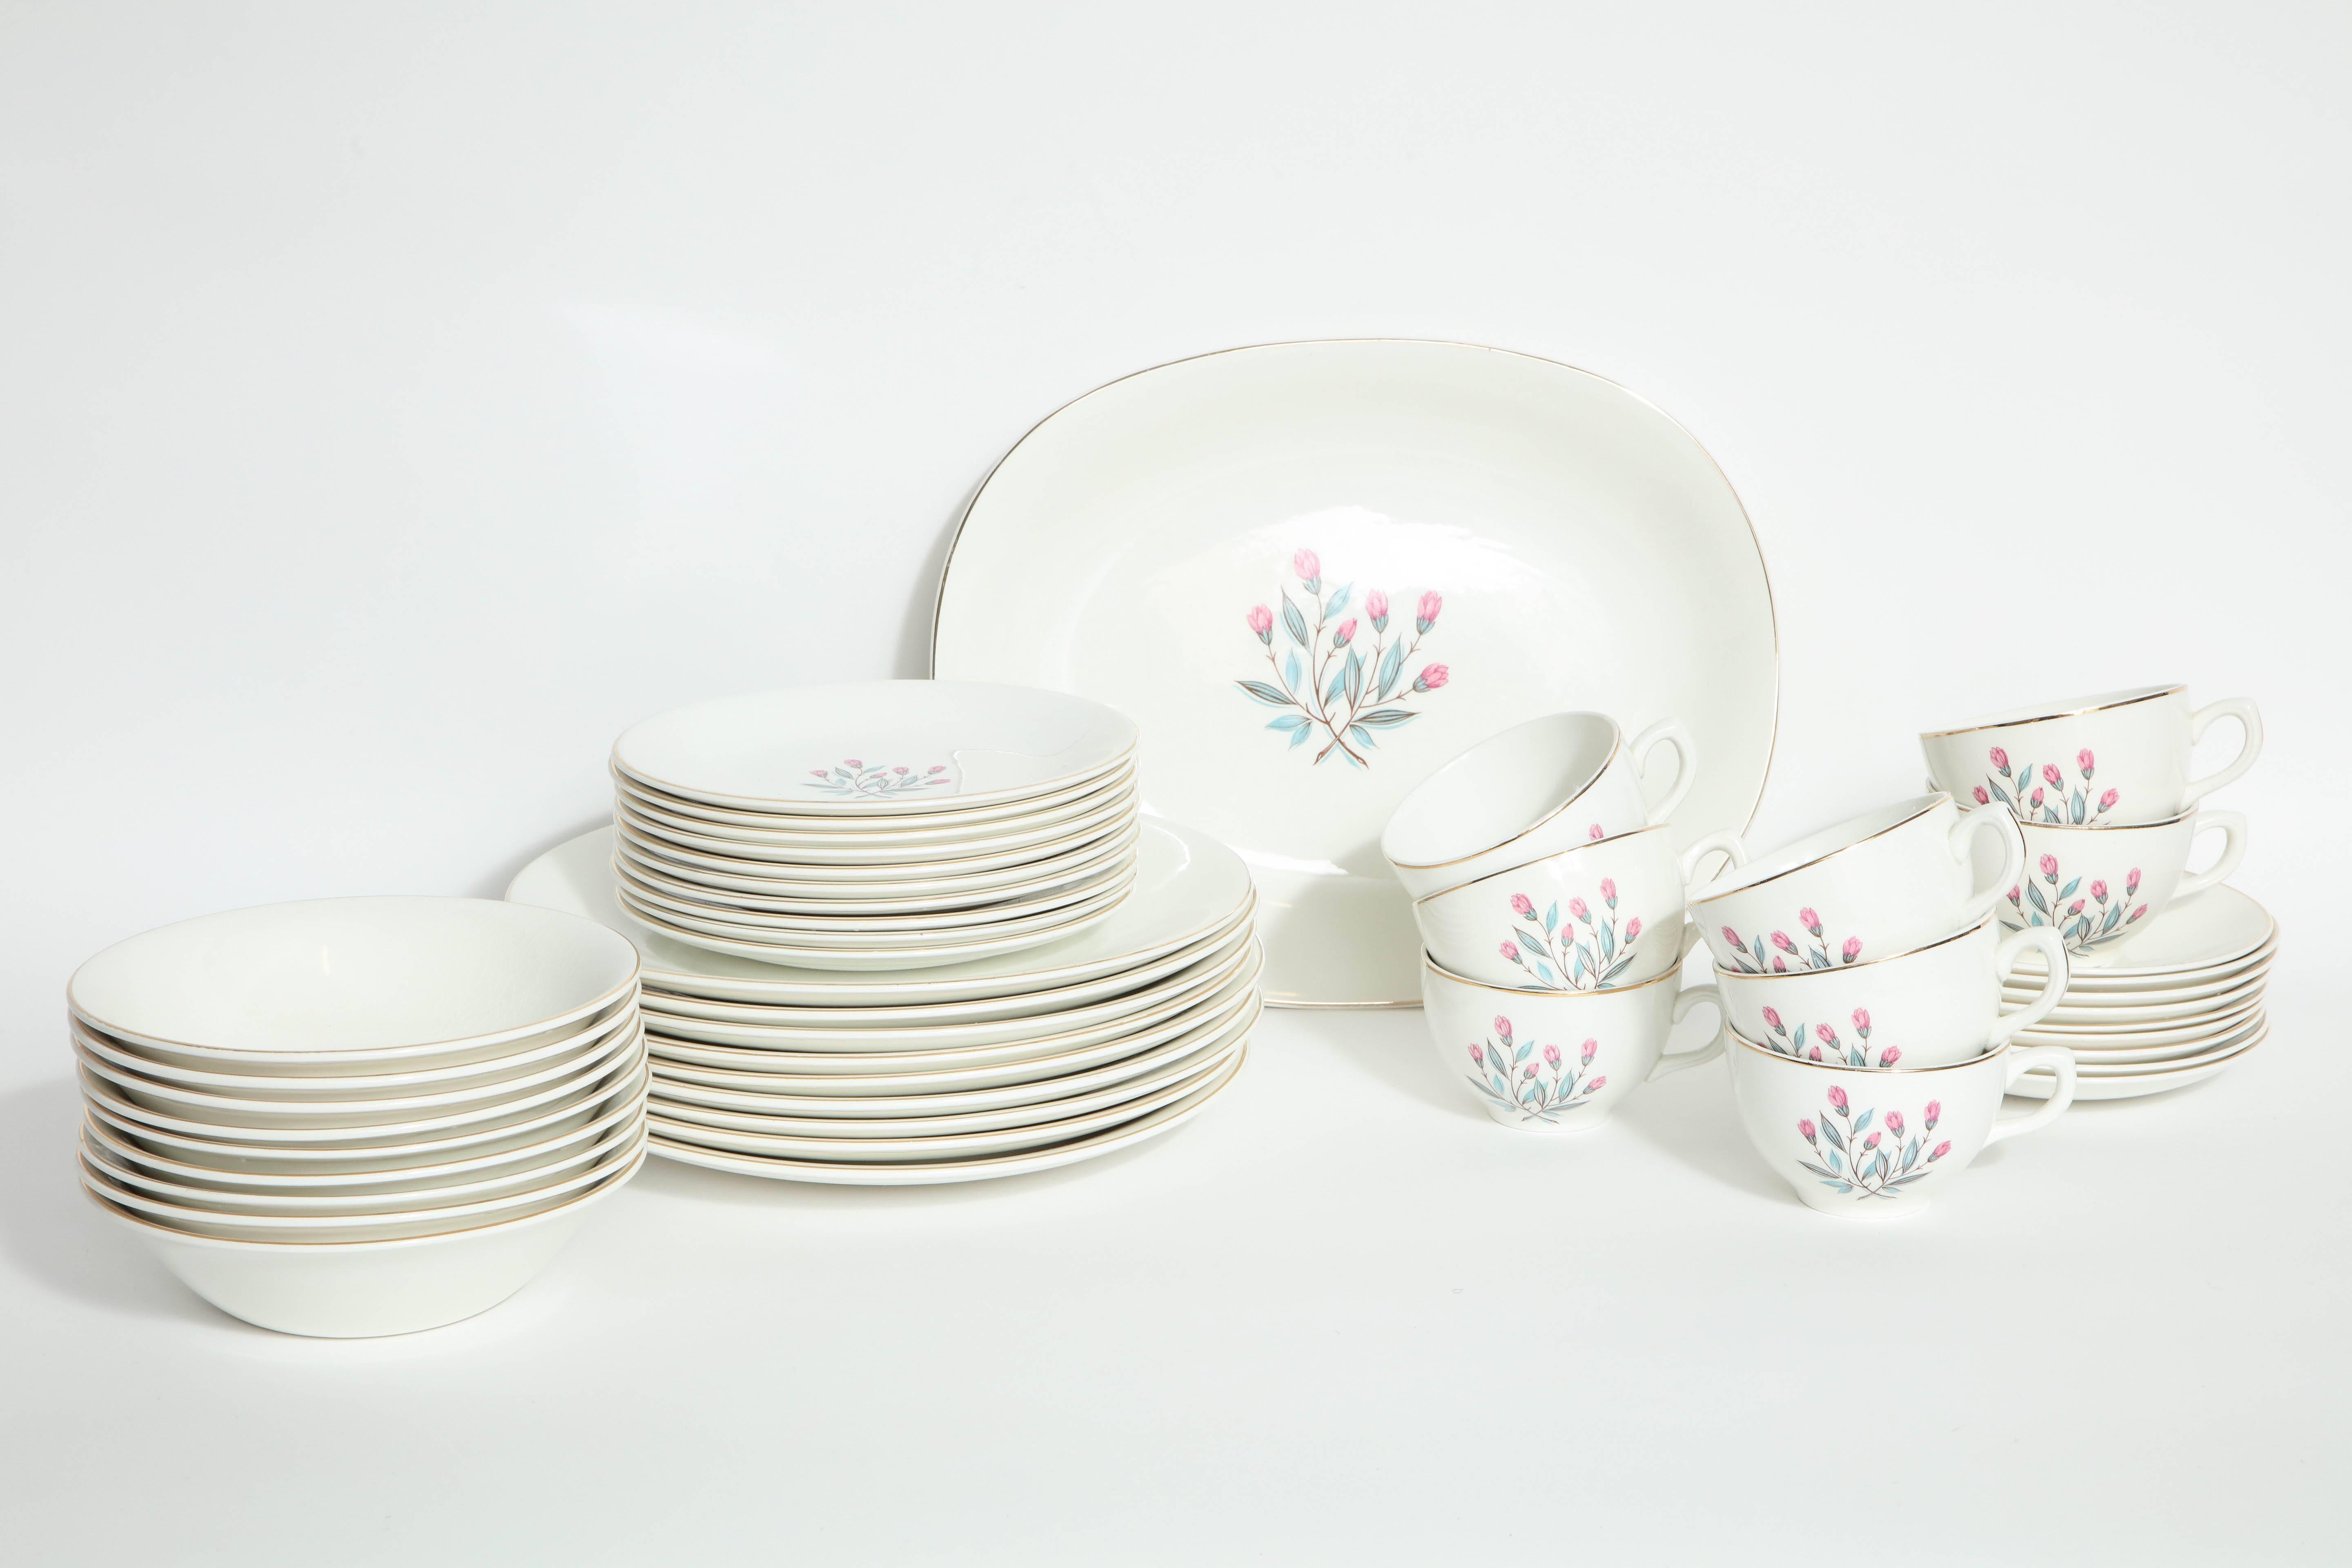 Mint condition 45 piece set of midcentury China by Wedgewood, England. Background color is bone white with stylized pink crocus flowers decoration all trimmed in gold. Mint condition, never used was in a display hutch.
Set includes:
Platter not